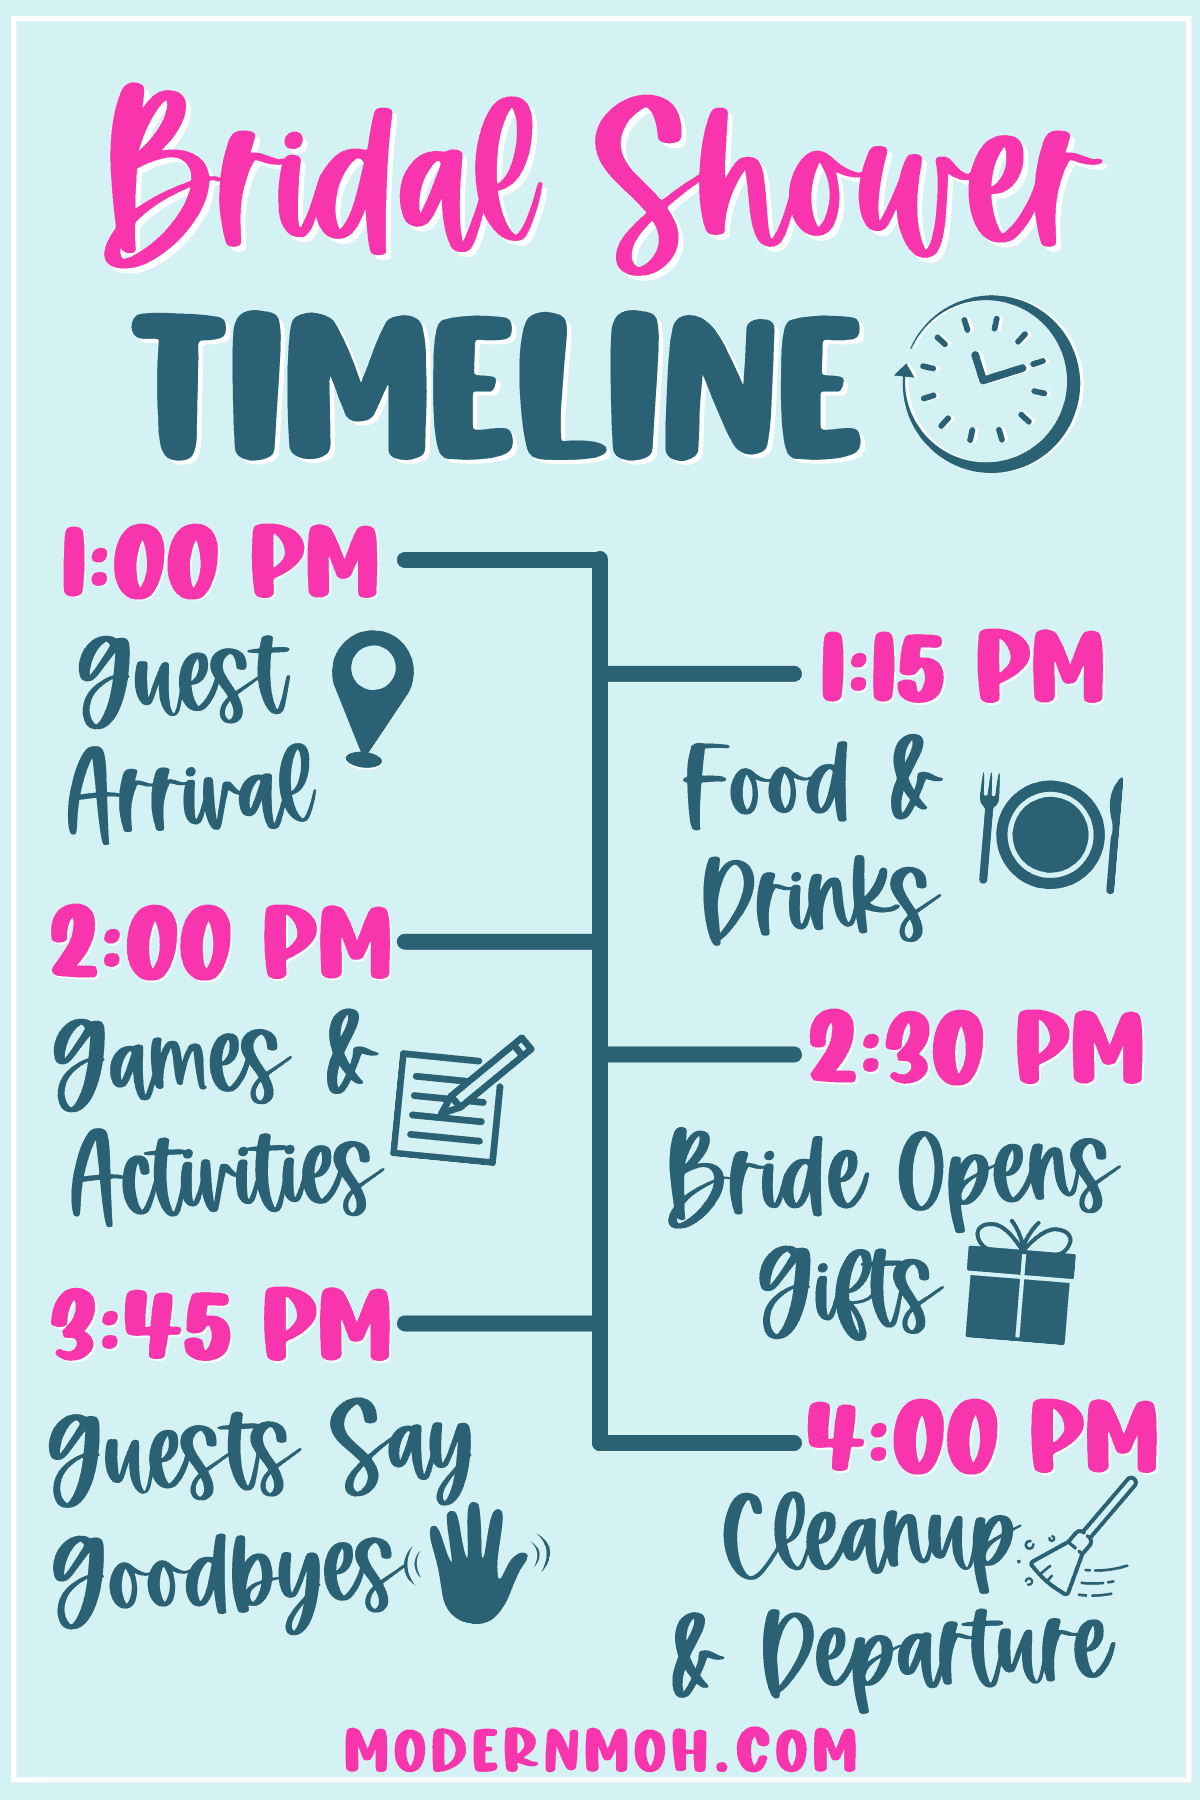 Bridal Shower Itinerary Template Create your personalized wedding plan